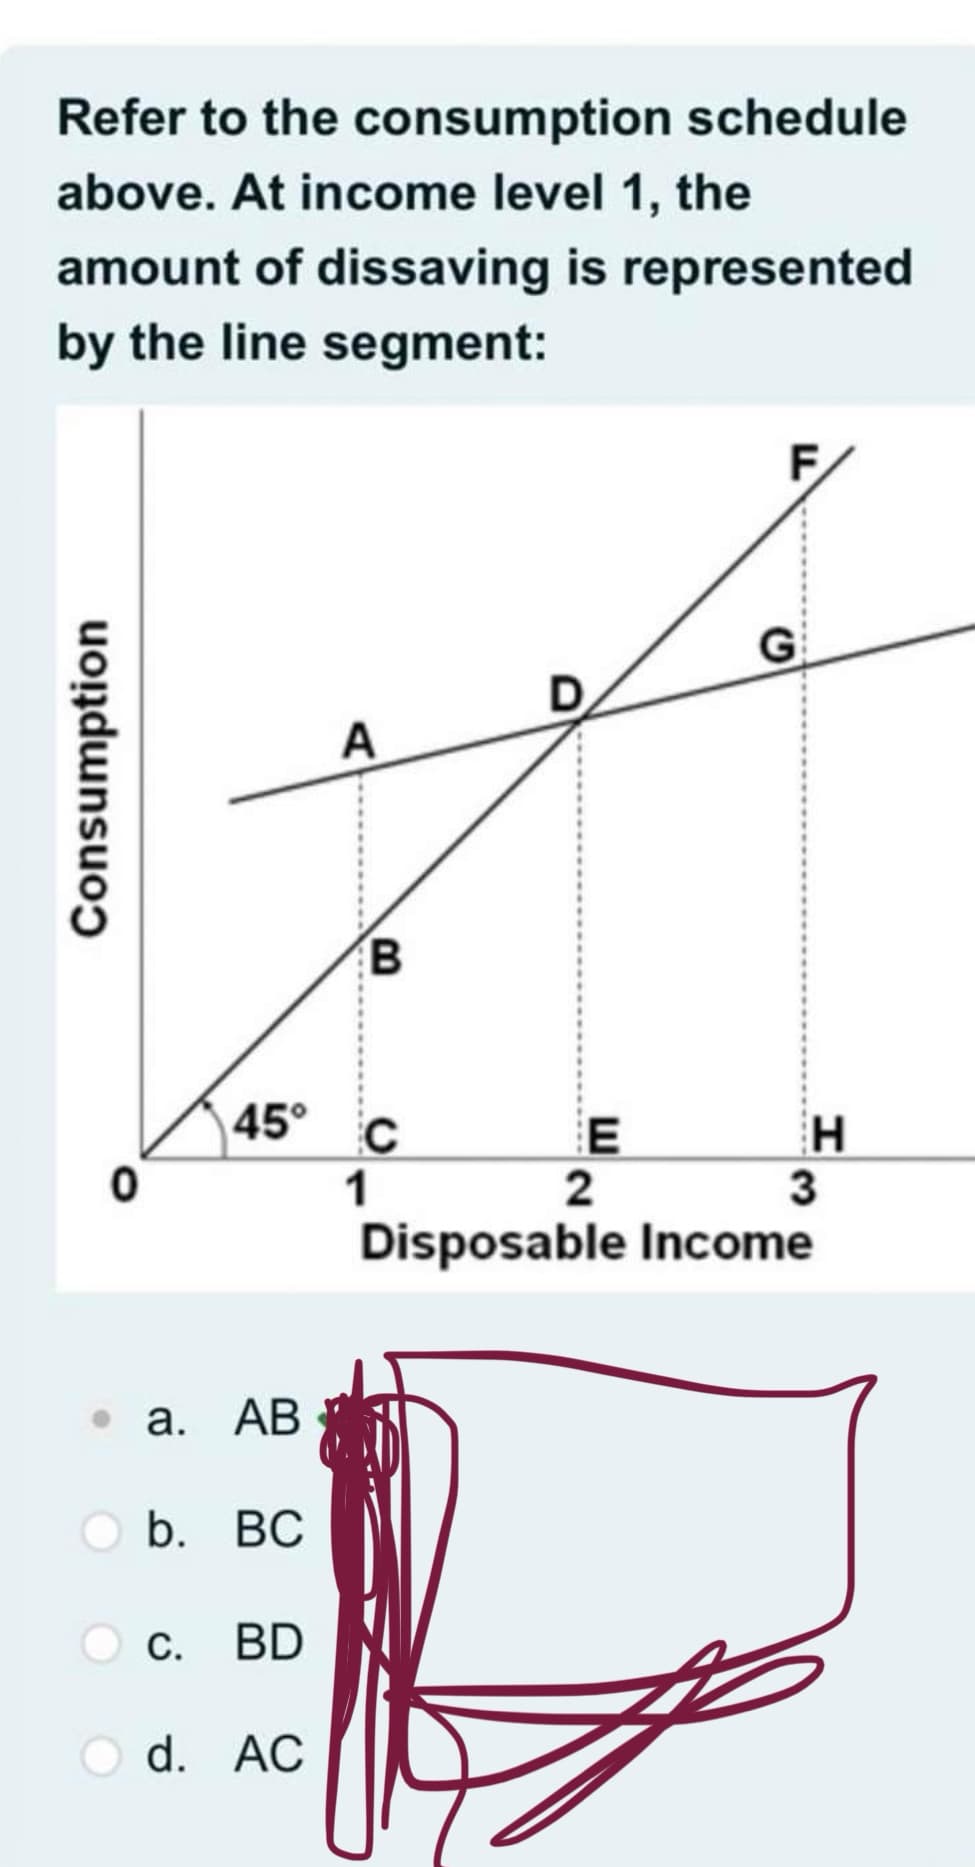 Refer to the consumption schedule
above. At income level 1, the
amount of dissaving is represented
by the line segment:
Consumption
0
45°
. a. AB
b. BC
C. BD
Od. AC
A
B
C
1
D
E
2
F
H
3
Disposable Income